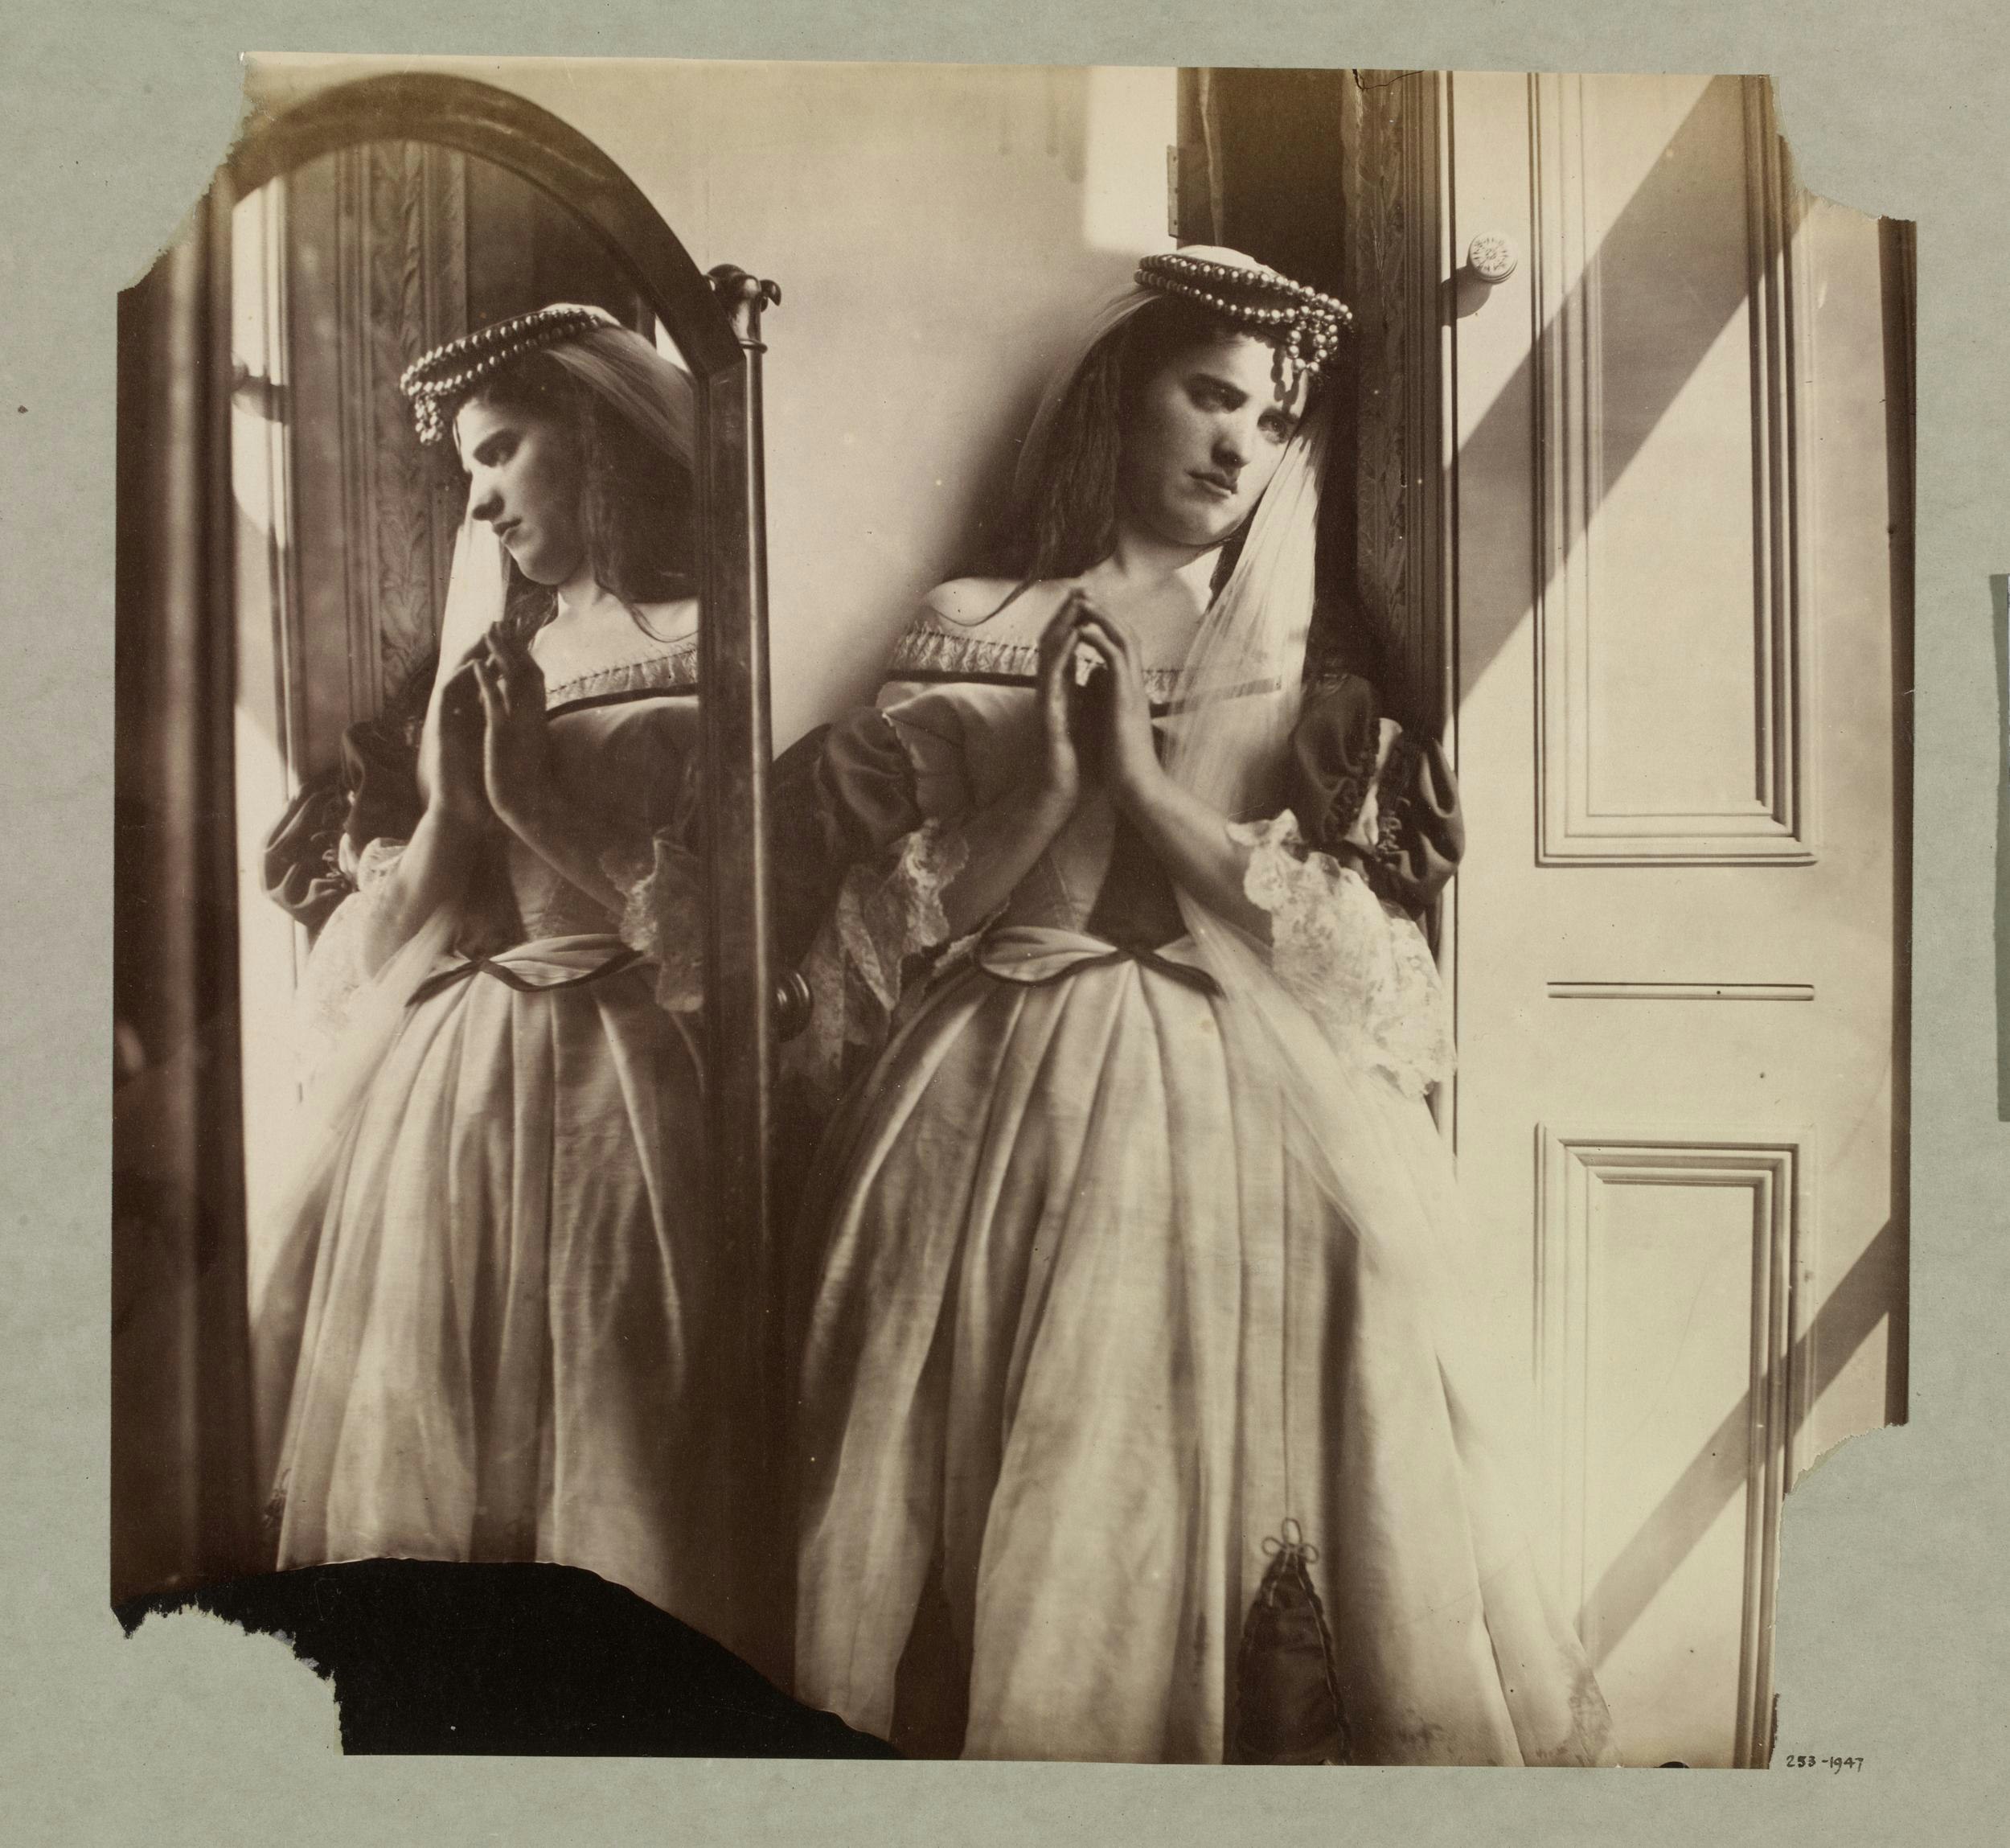 Photograph by Lady Hawarden, c. 1863 Victoria and Albert Museum, London (29385)